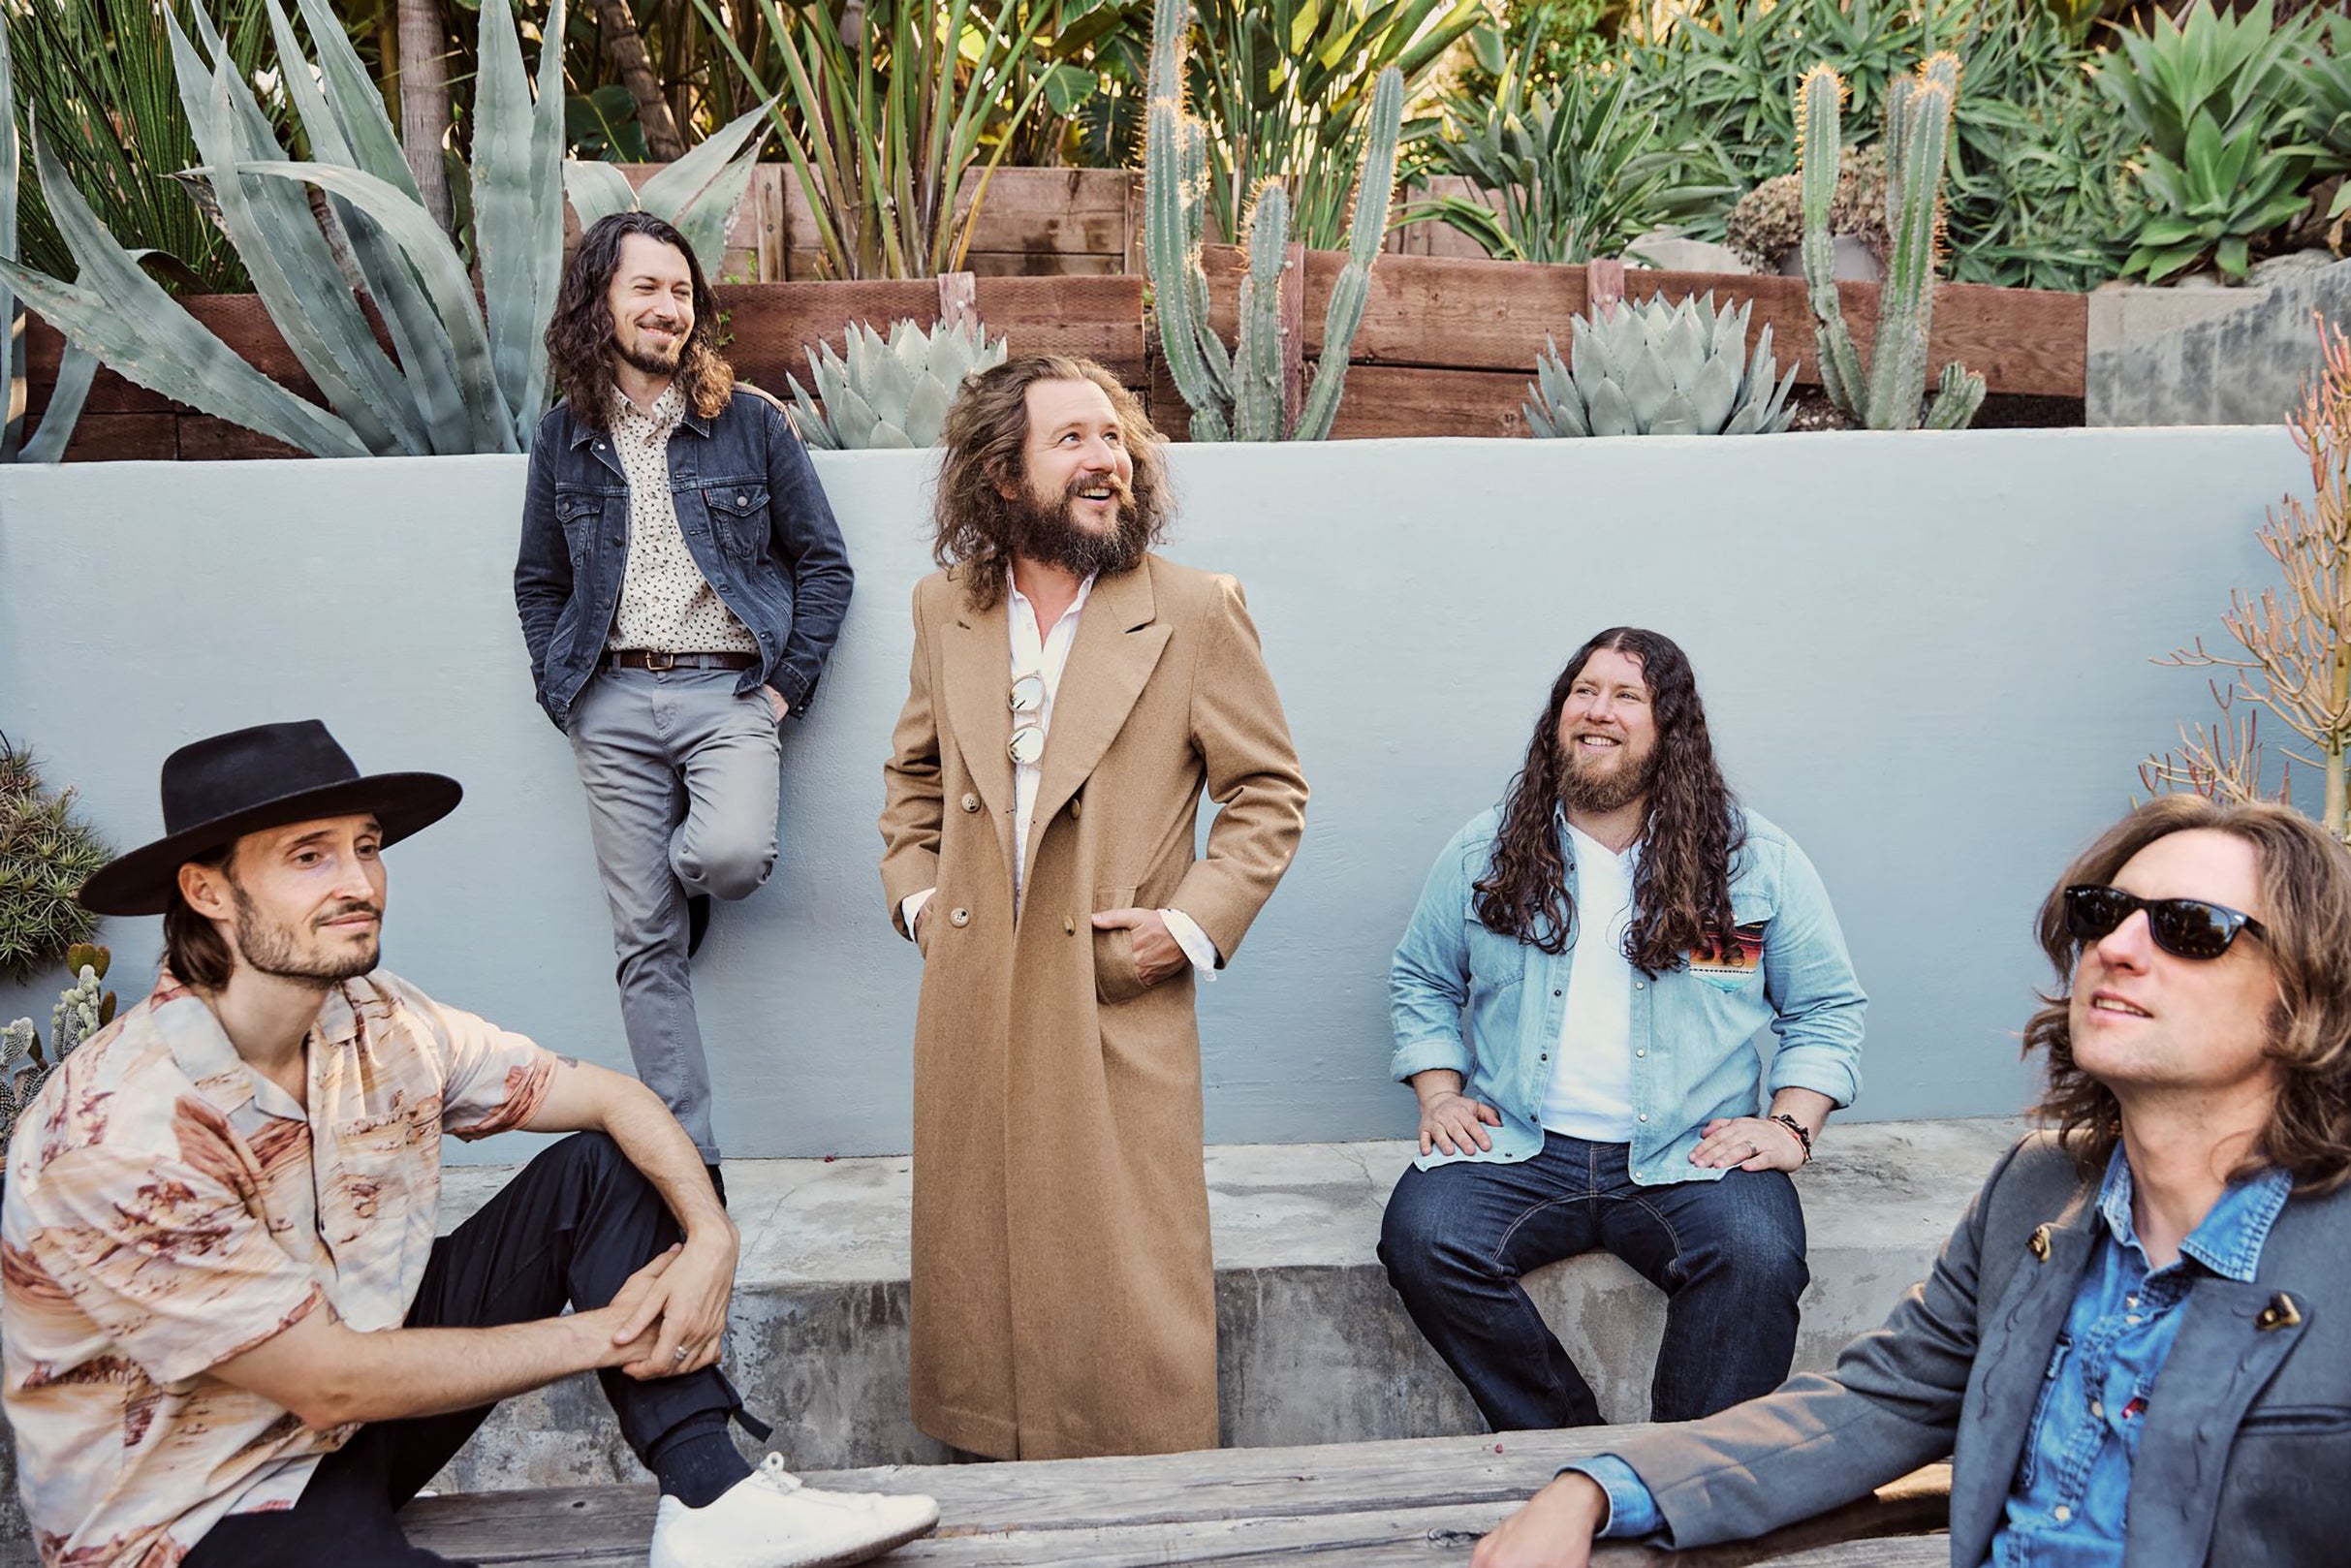 Eye To Eye Tour - My Morning Jacket and Nathaniel Rateliff & TNS presale code for real tickets in Nashville